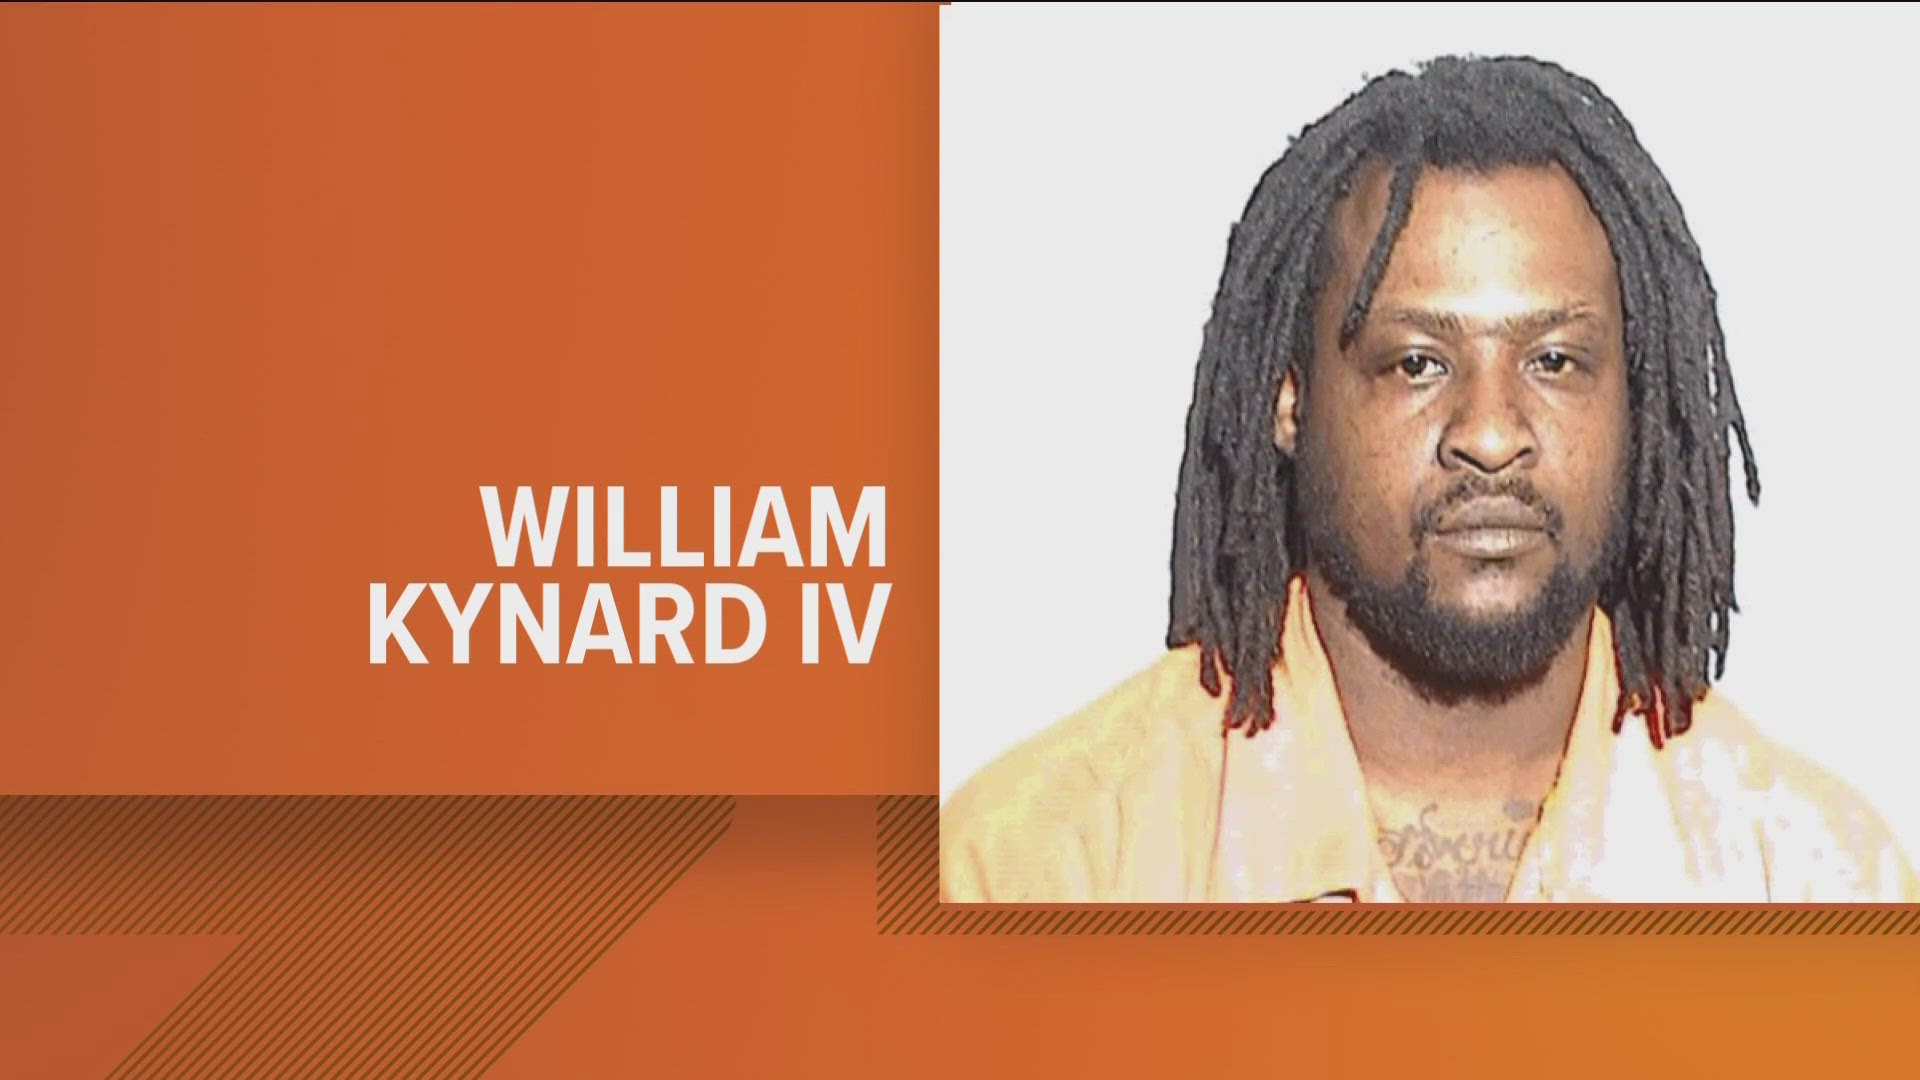 35-year-old William Kynard IV is charged with murder in the shooting death of Denzel Herron at a south Toledo shopping plaza.